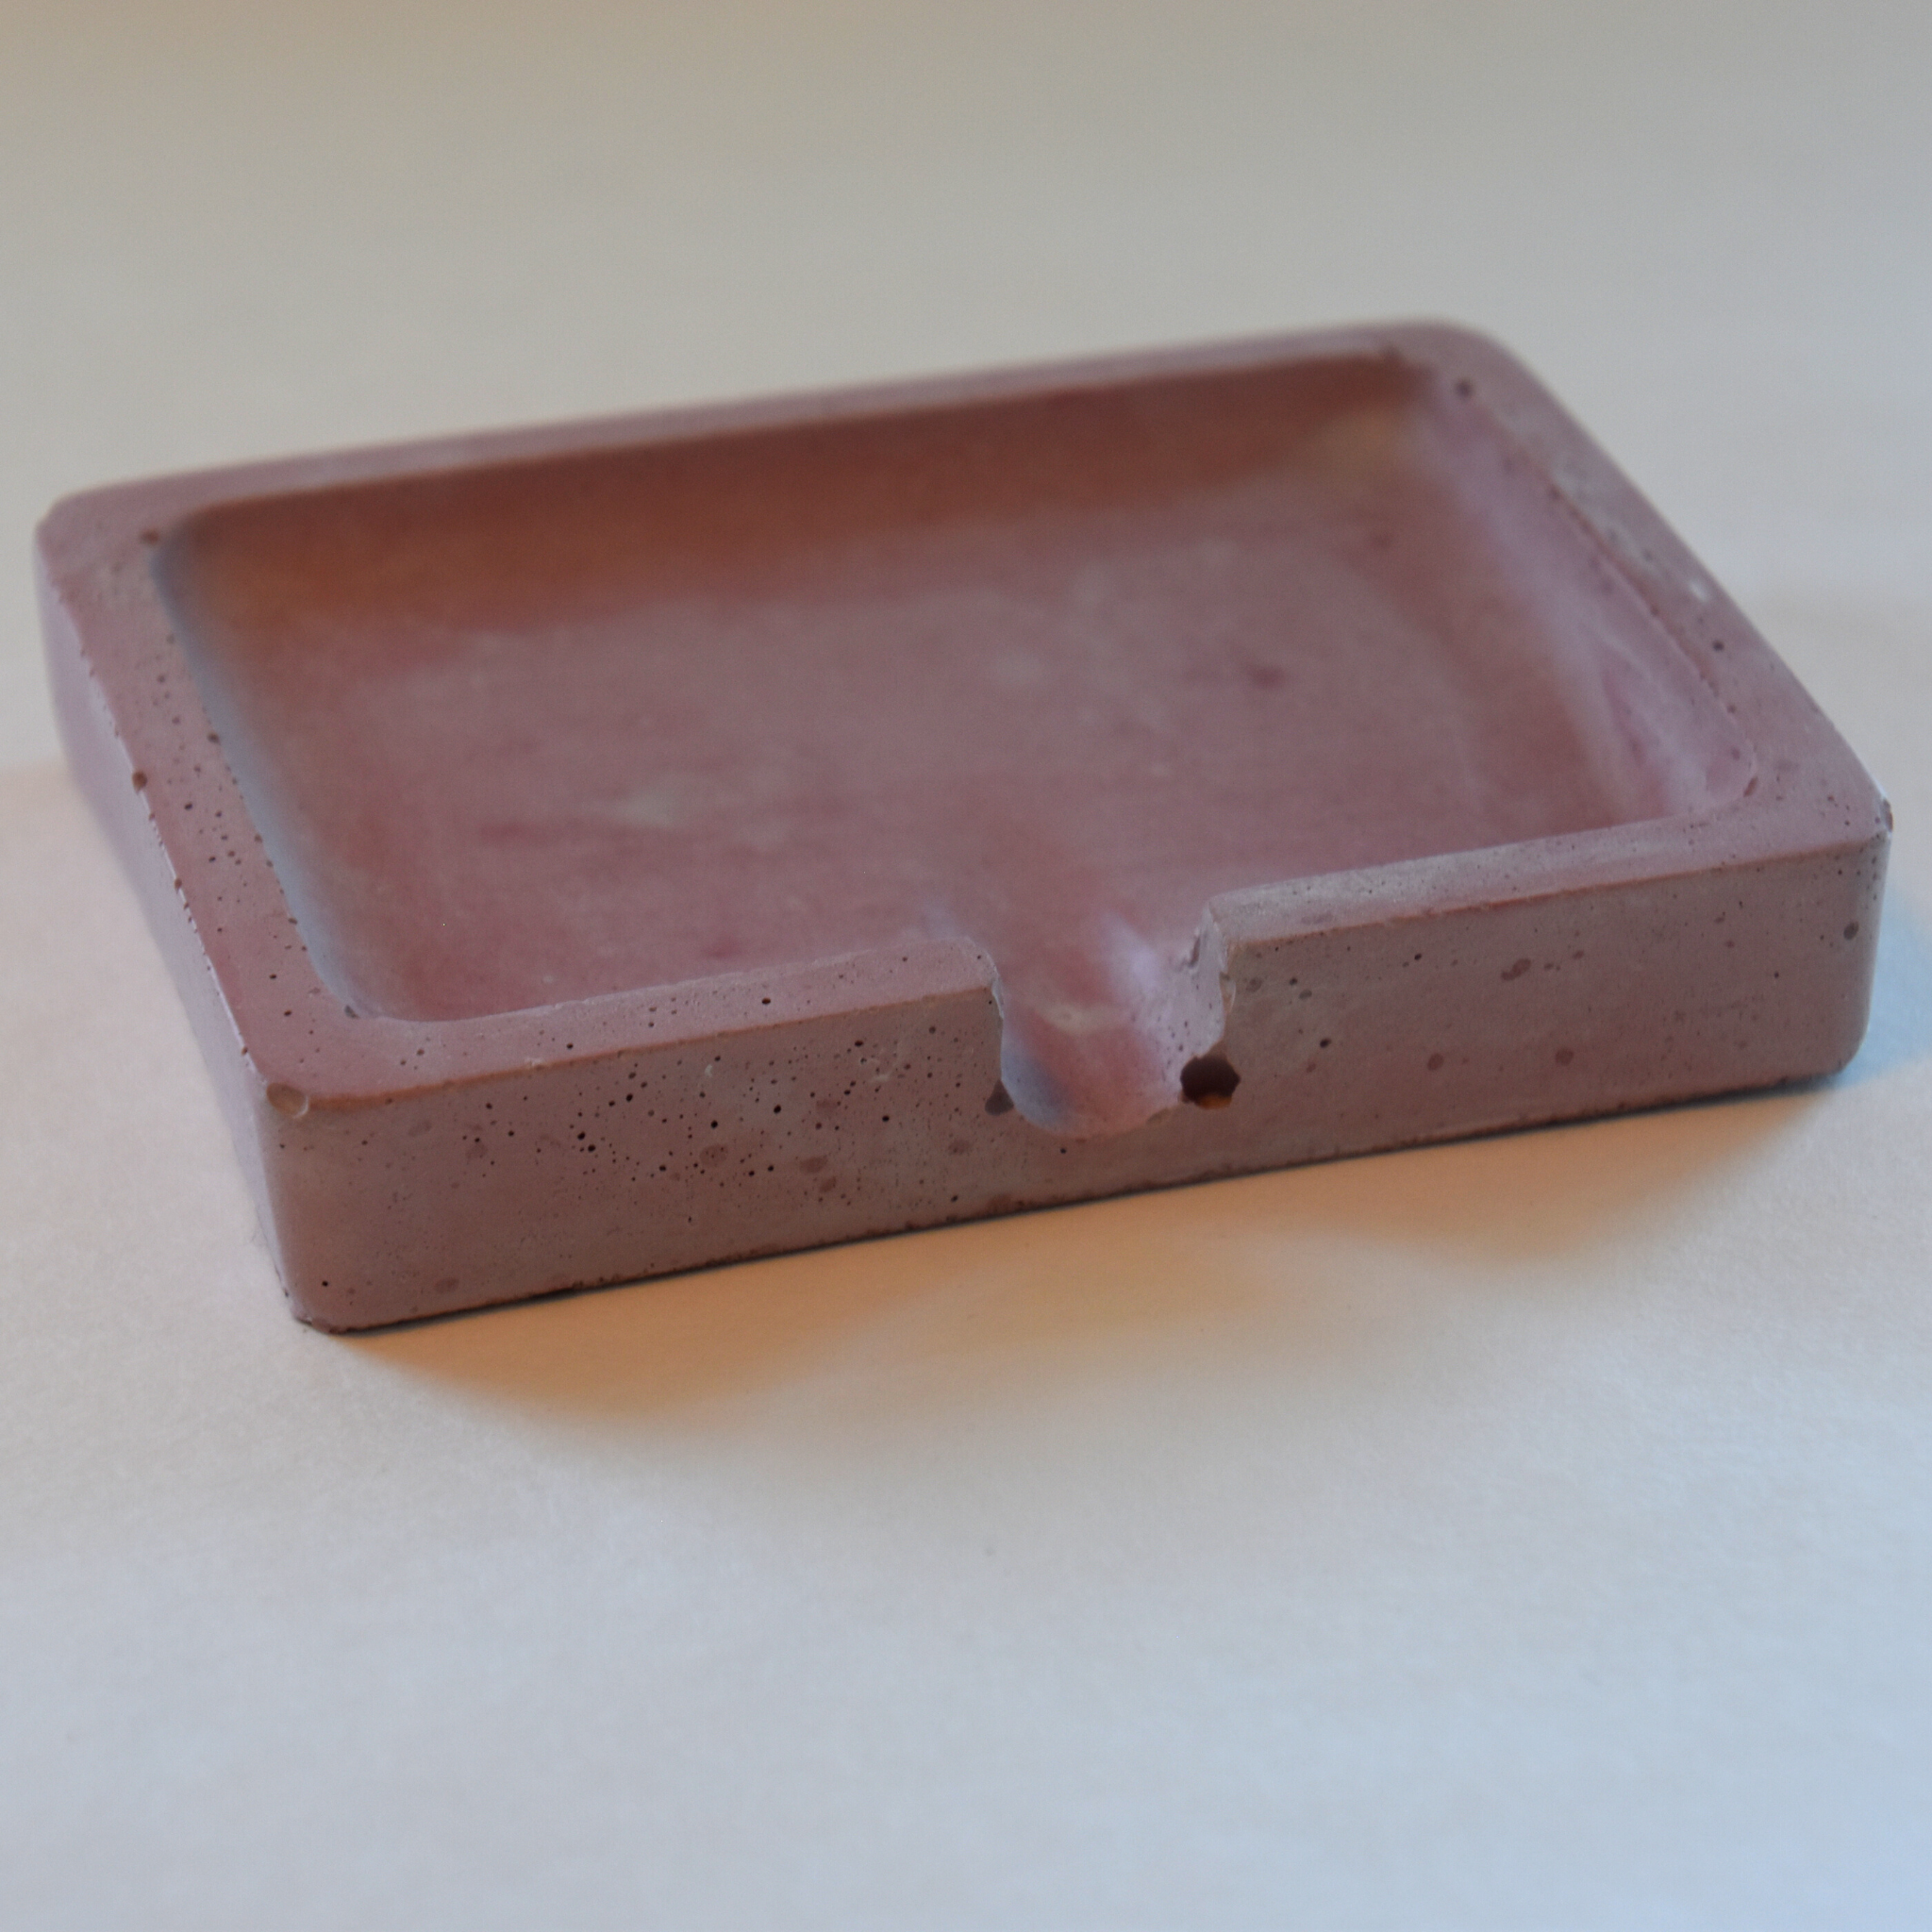 This pink soap dish has a fun vintage look.